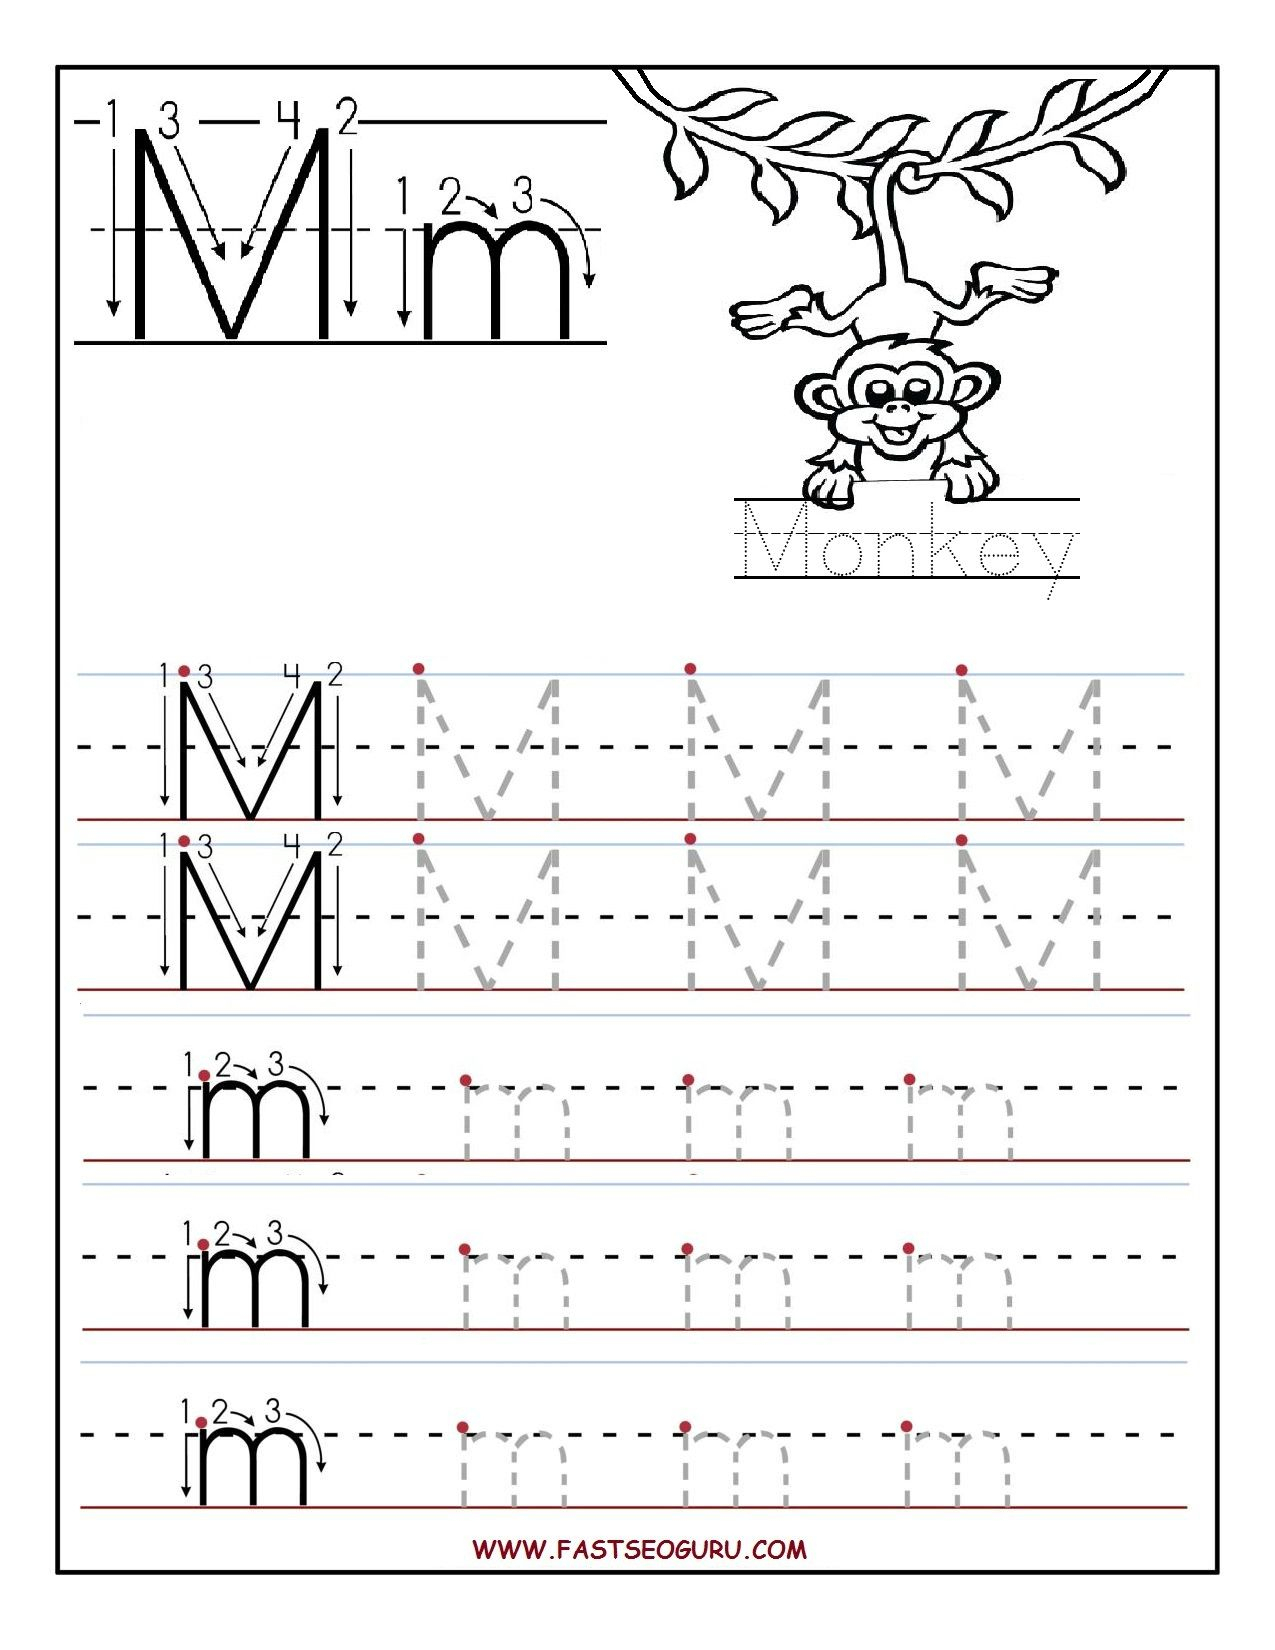 Printable Letter M Tracing Worksheets For Preschool | Pre School | Letter M Printable Worksheets